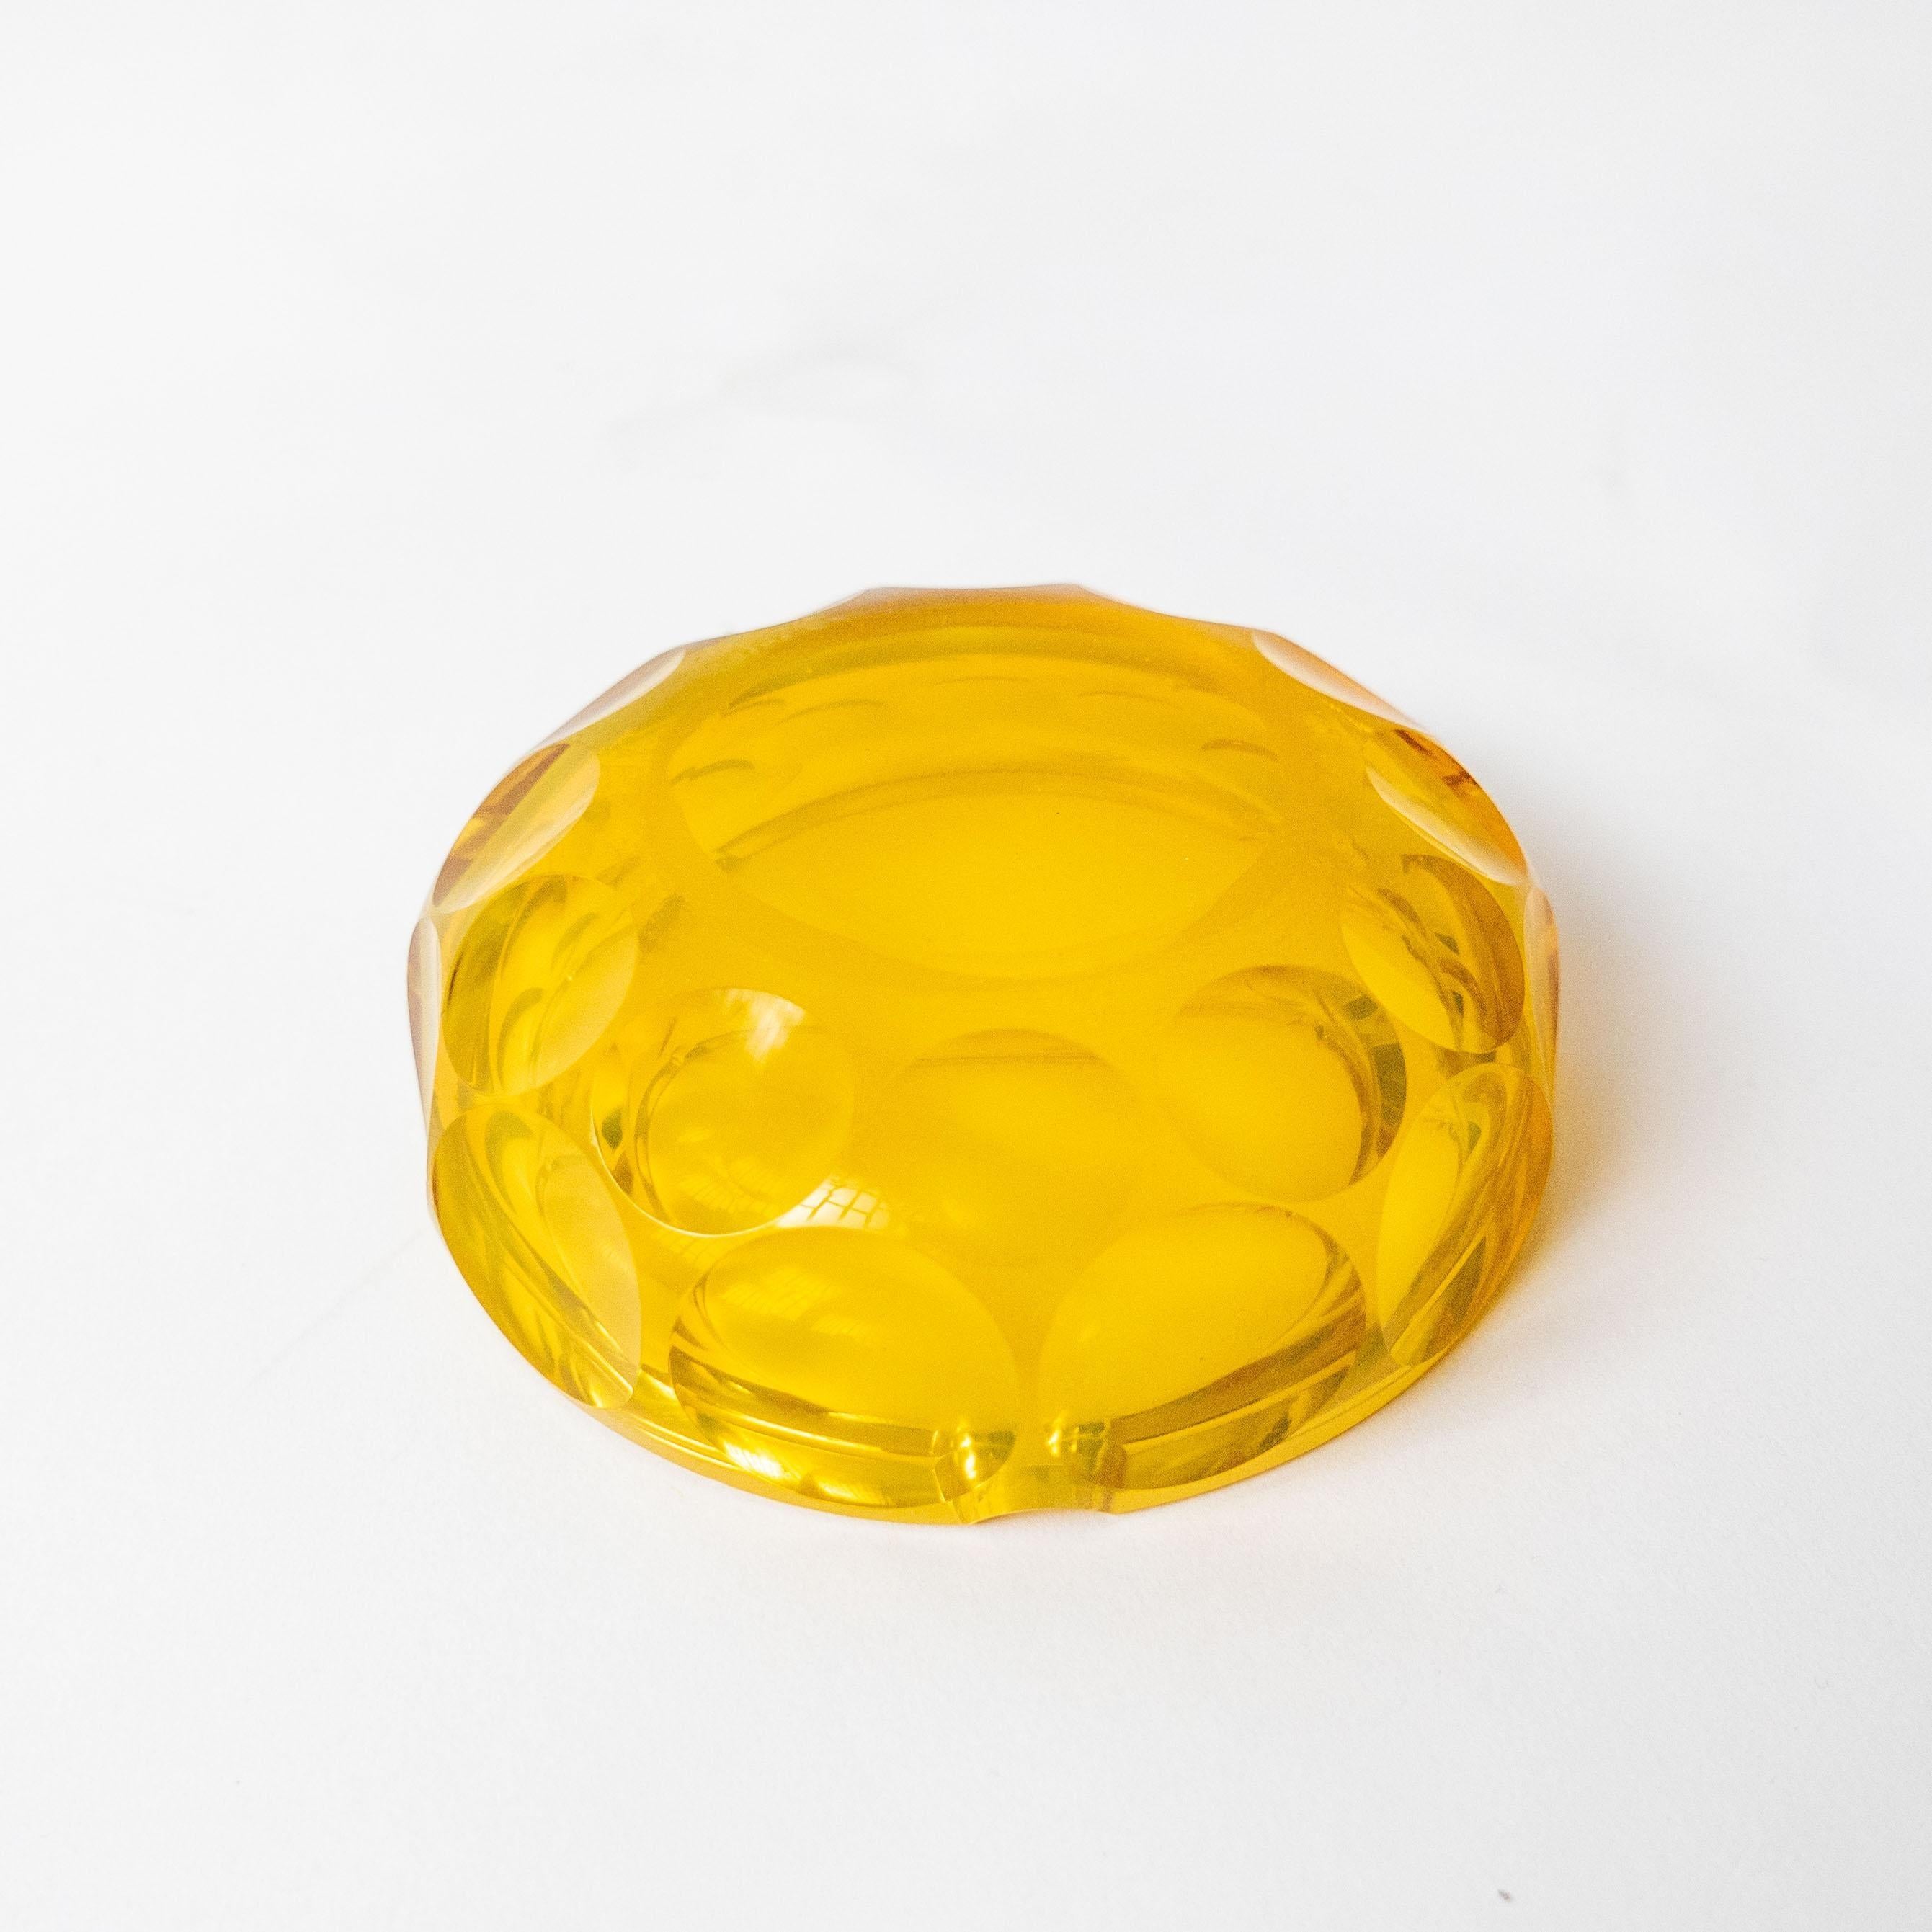 European Decorative glass bowl, yellow with dots For Sale